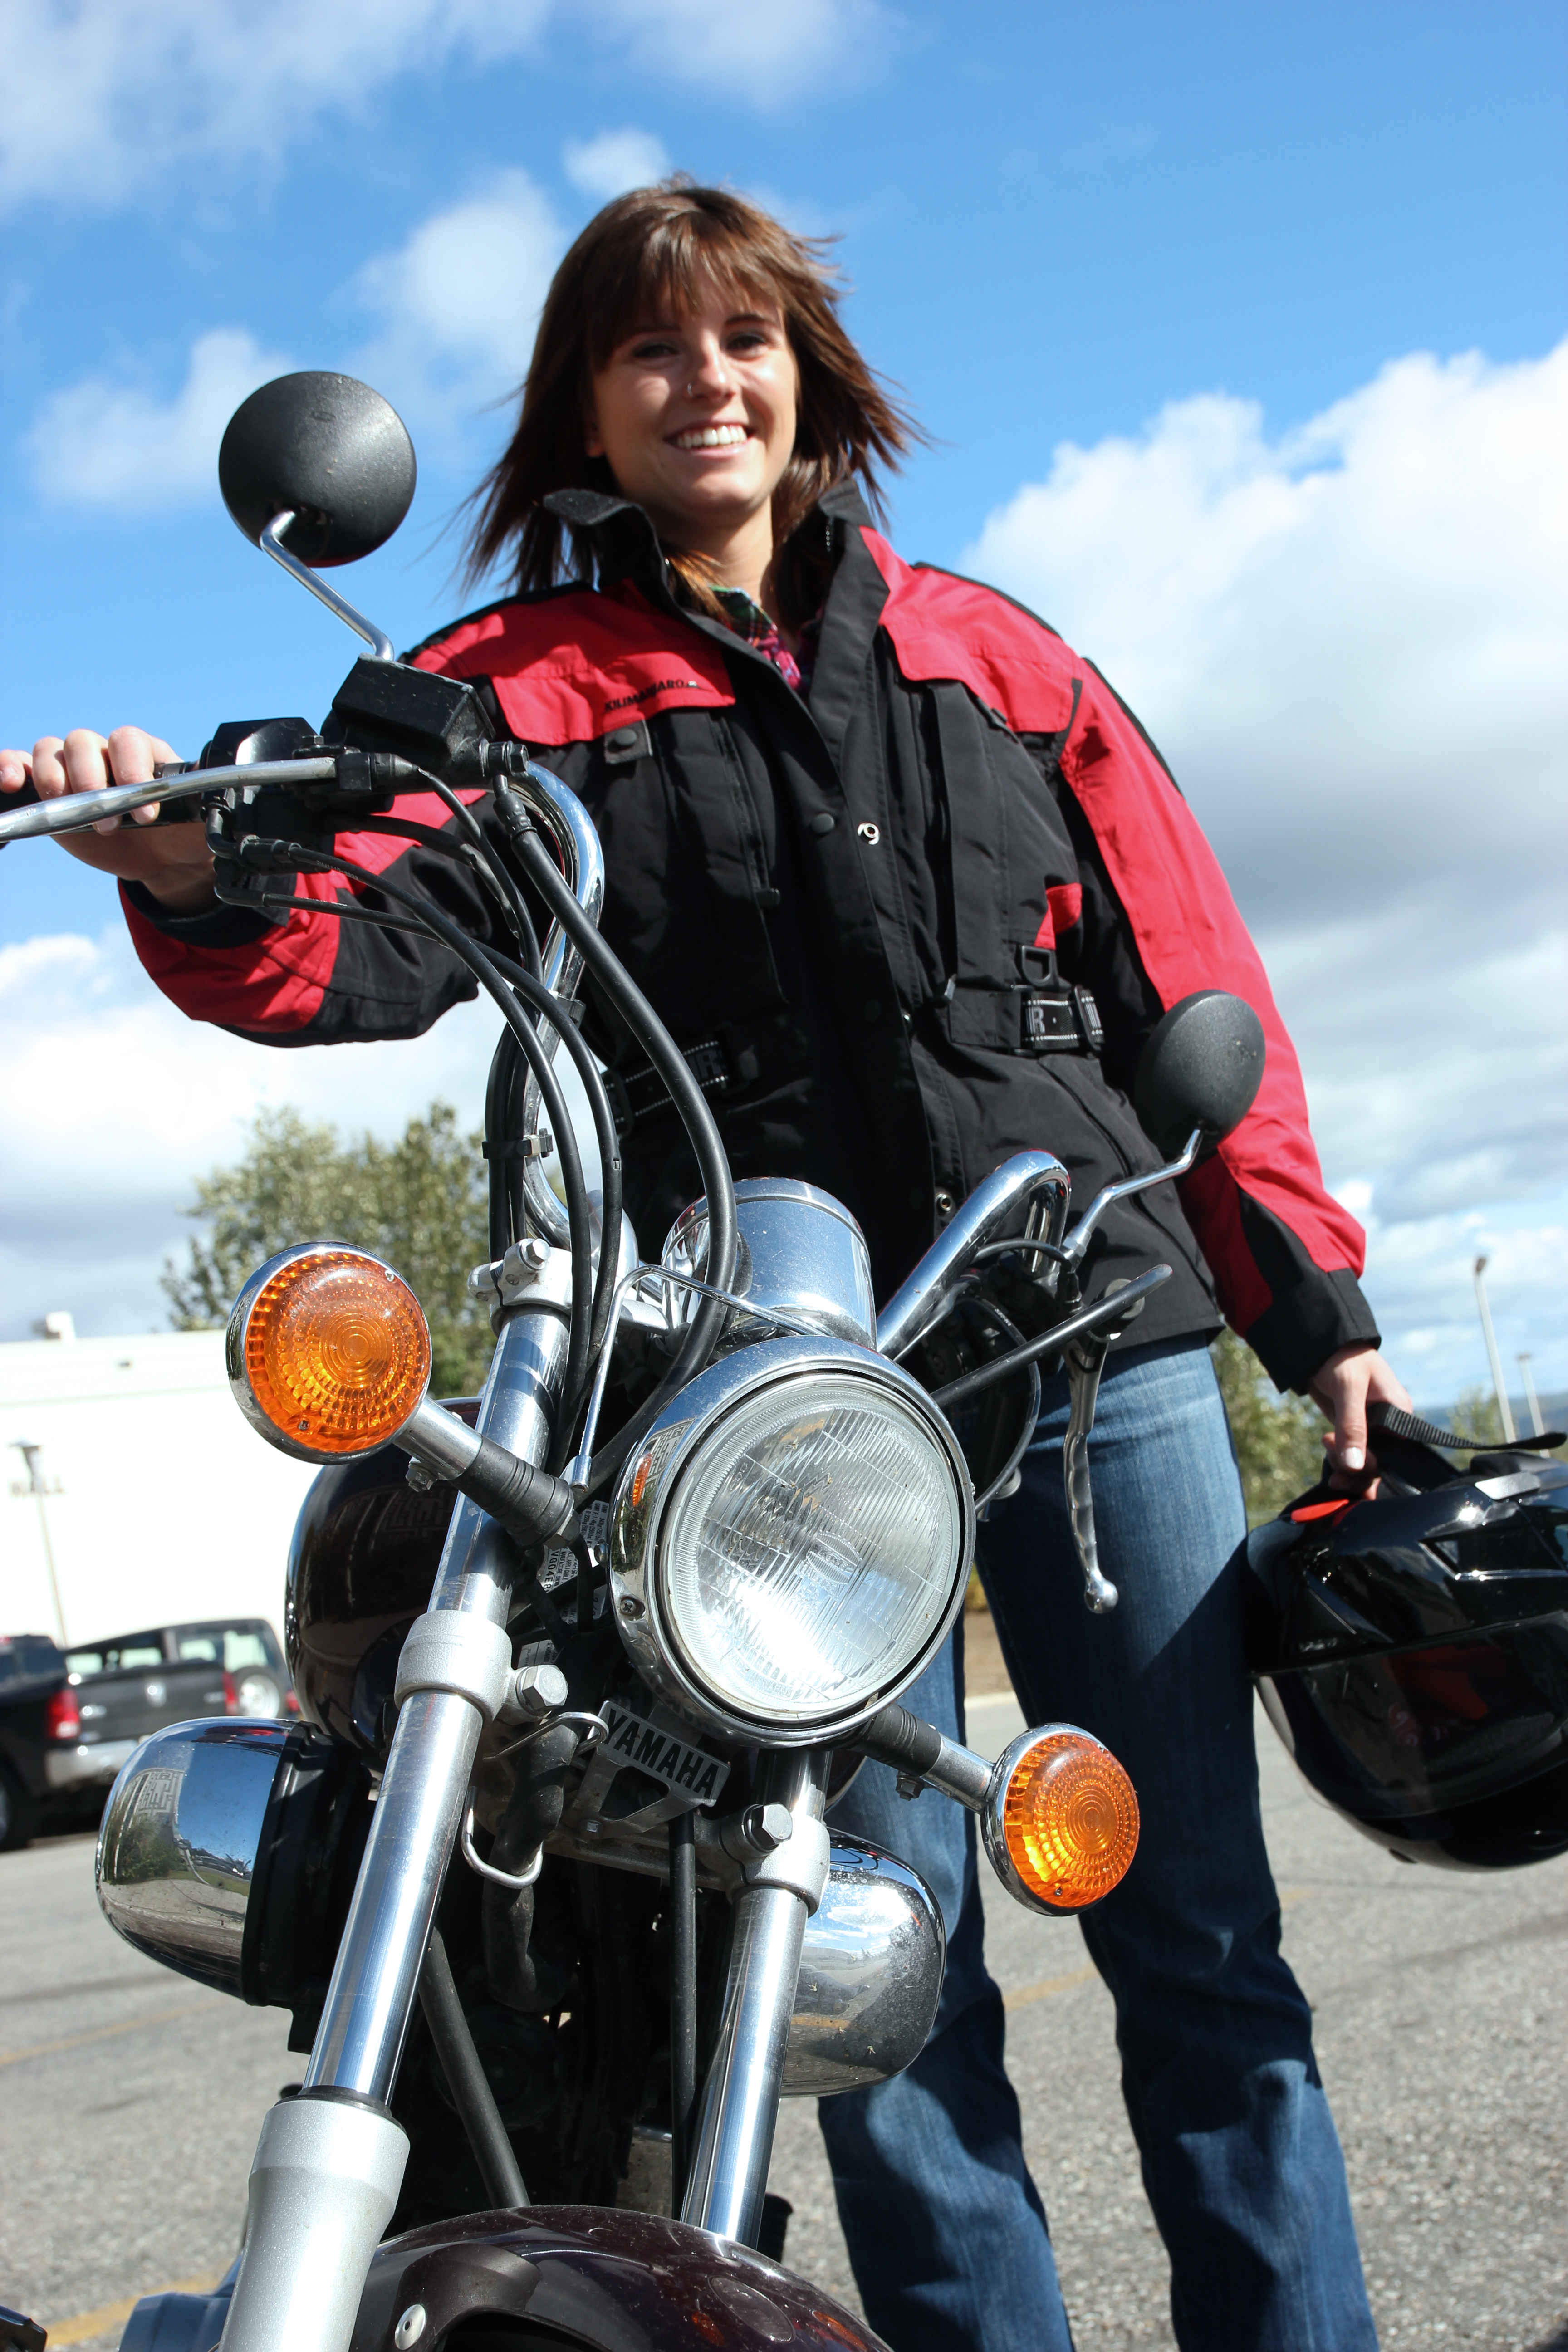 Julie poses with her Yamaha motorcycle.